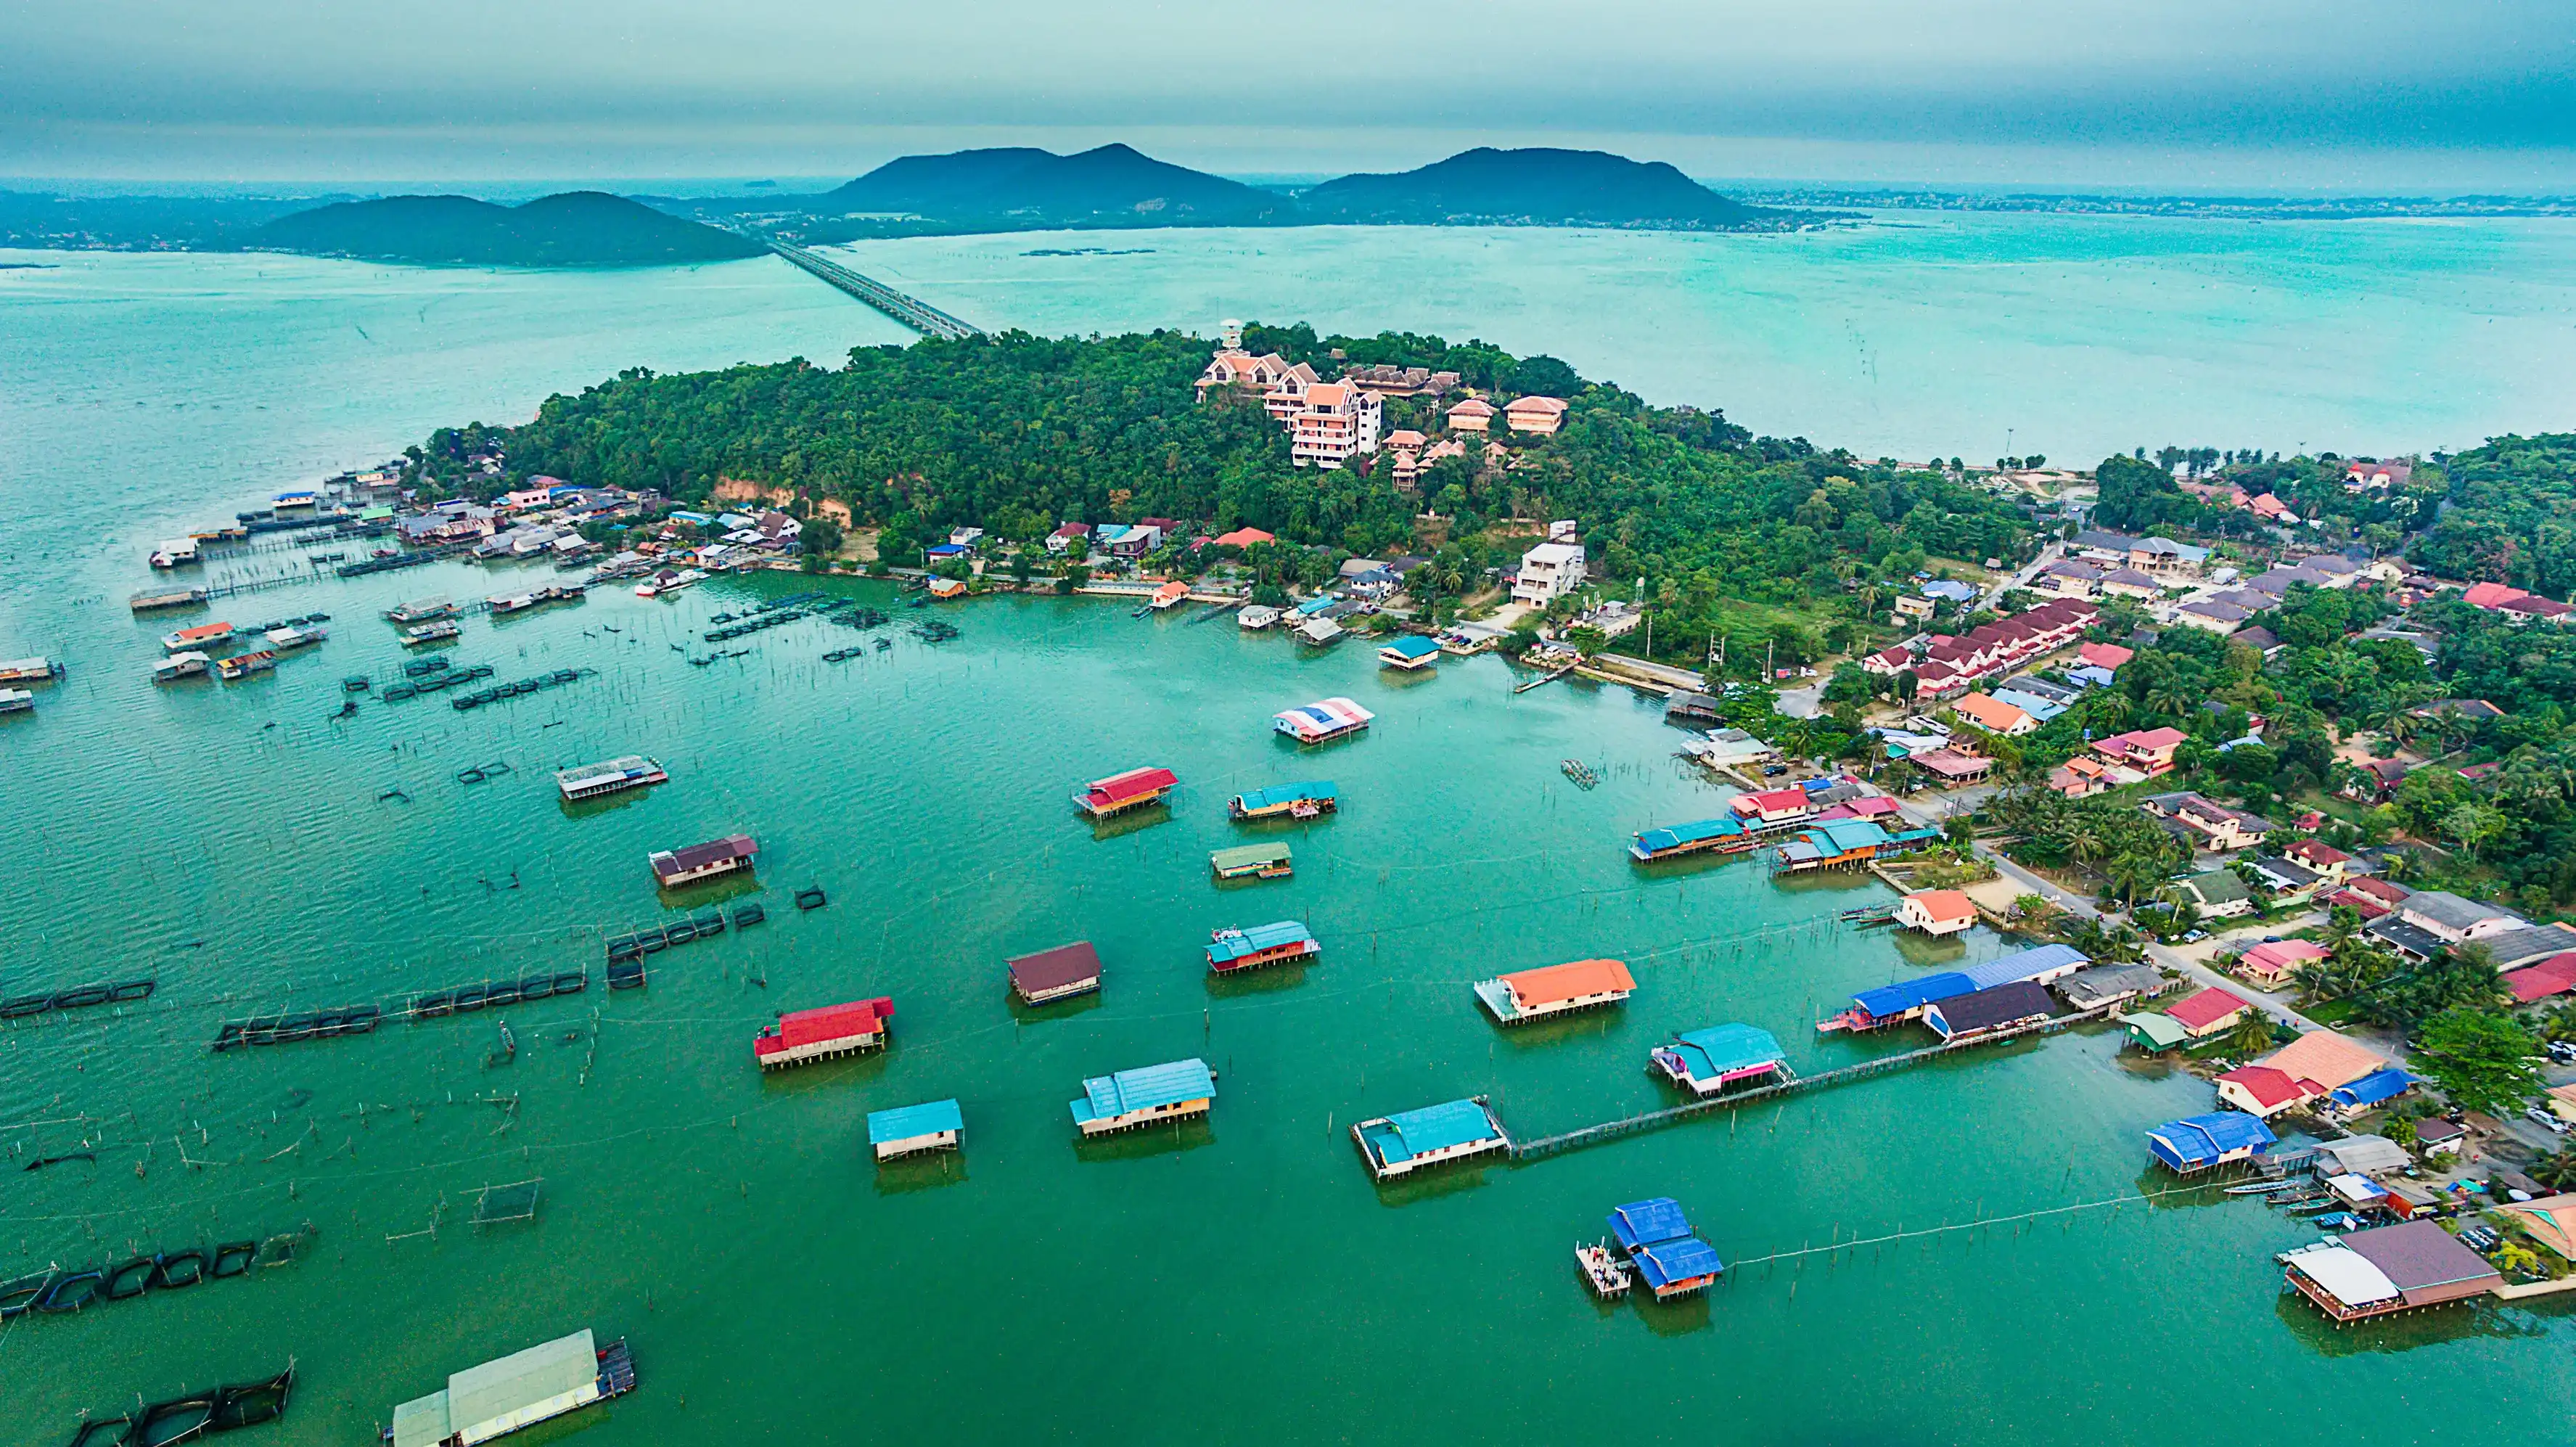 View of wooden house on the lake with island, Songkhla lake, Koh Yo island, Songkhla province,Thailand, Top view from drone